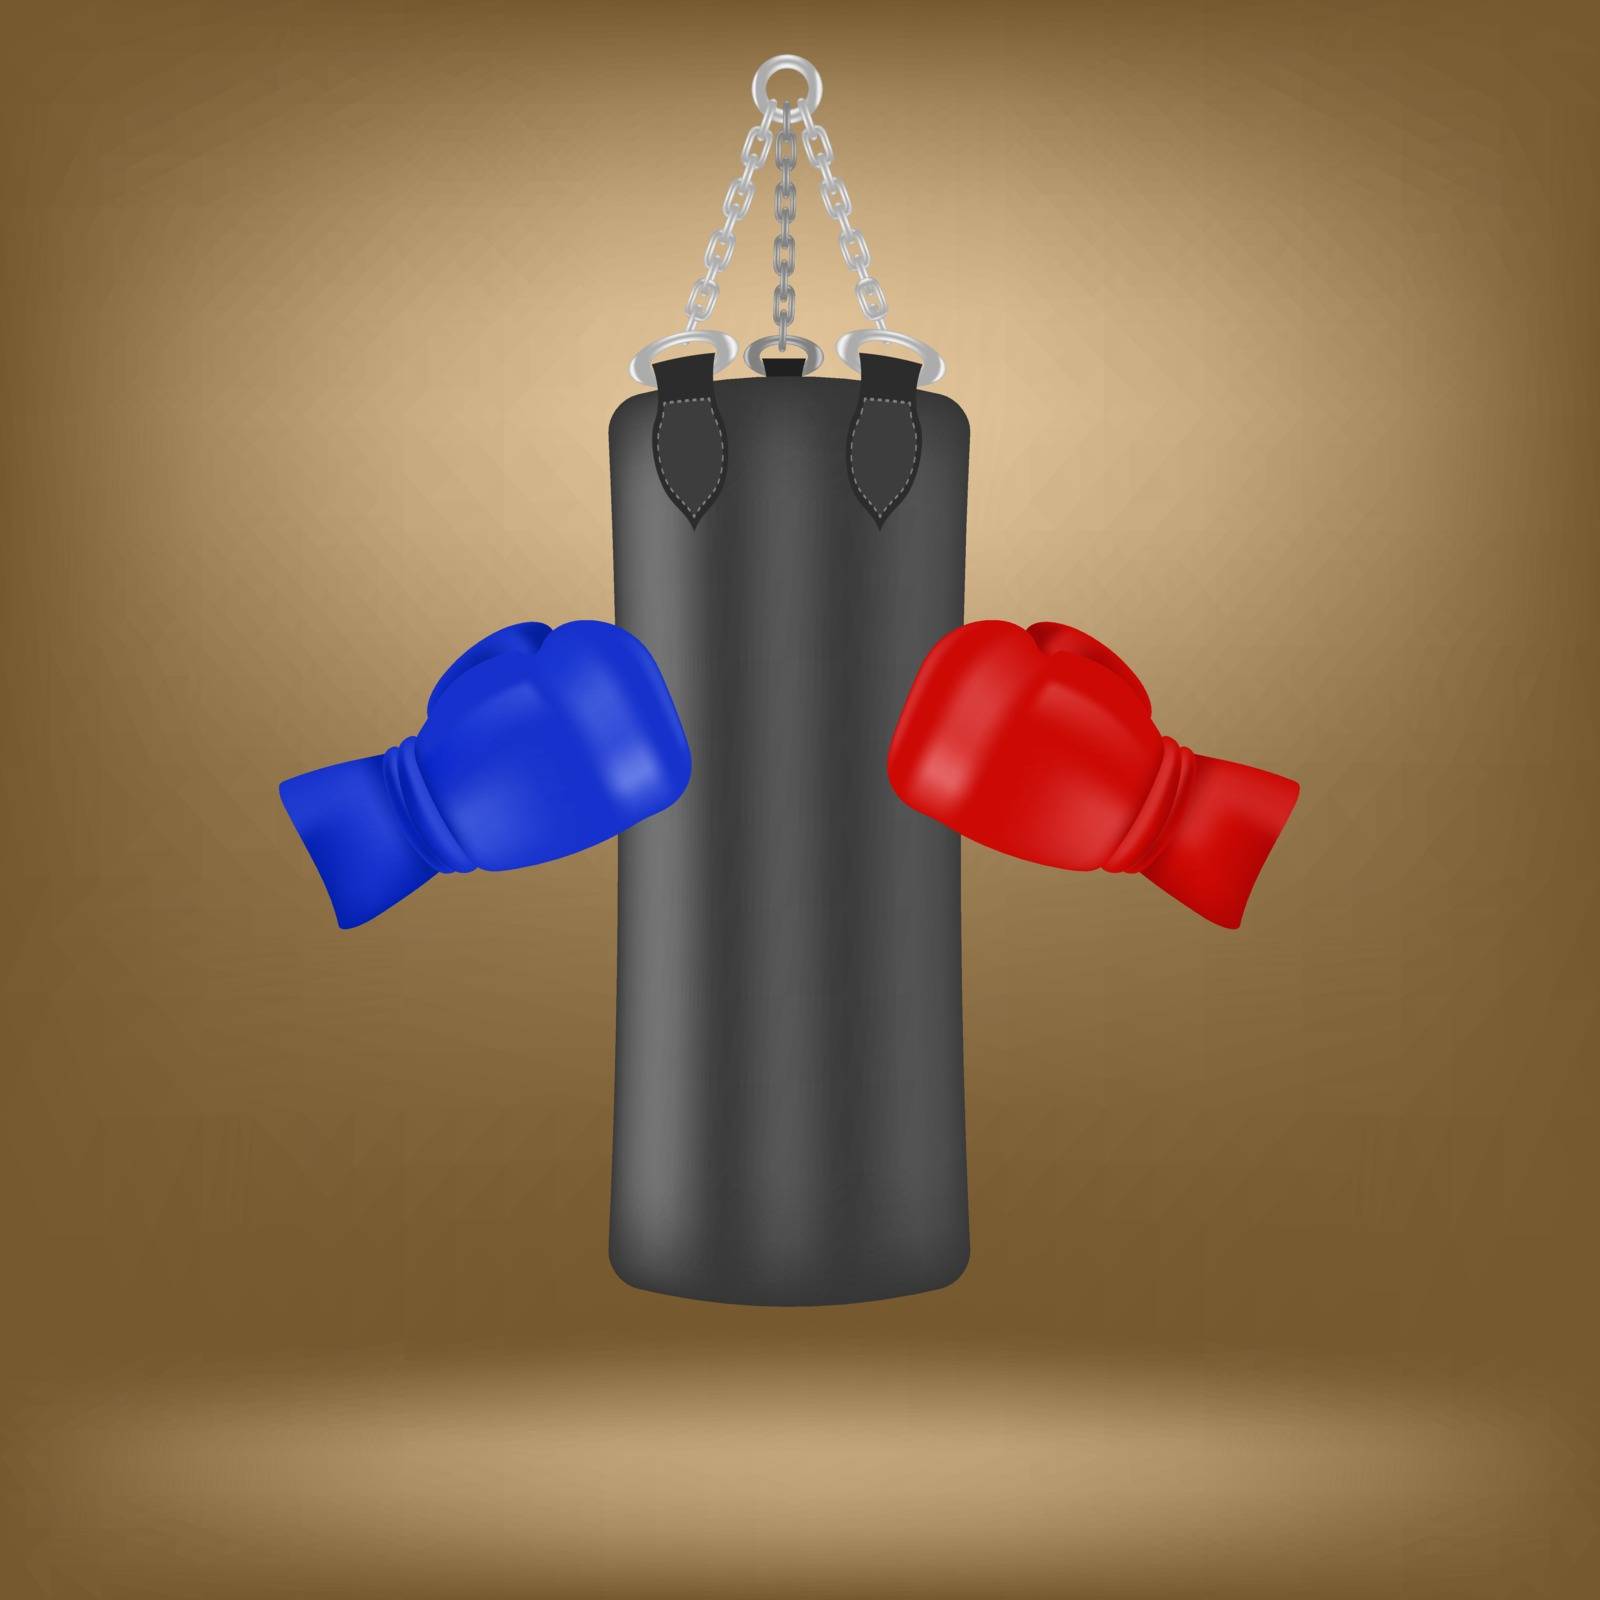 Boxing Gloves and Black Sport Bag Isolated on Brown Background